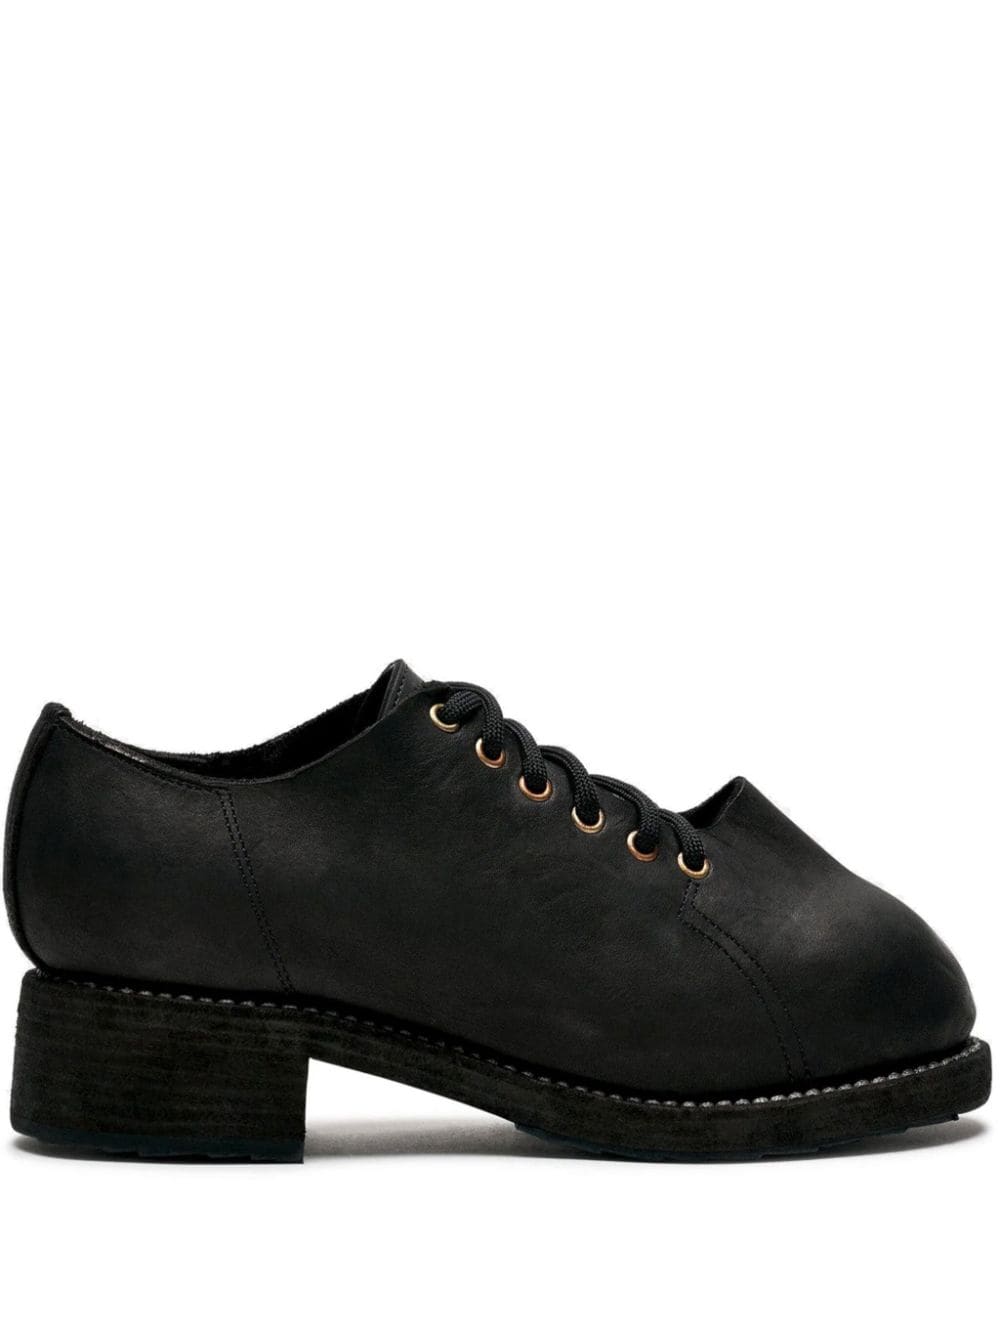 Guidi 2091 Groppone derby shoes Black